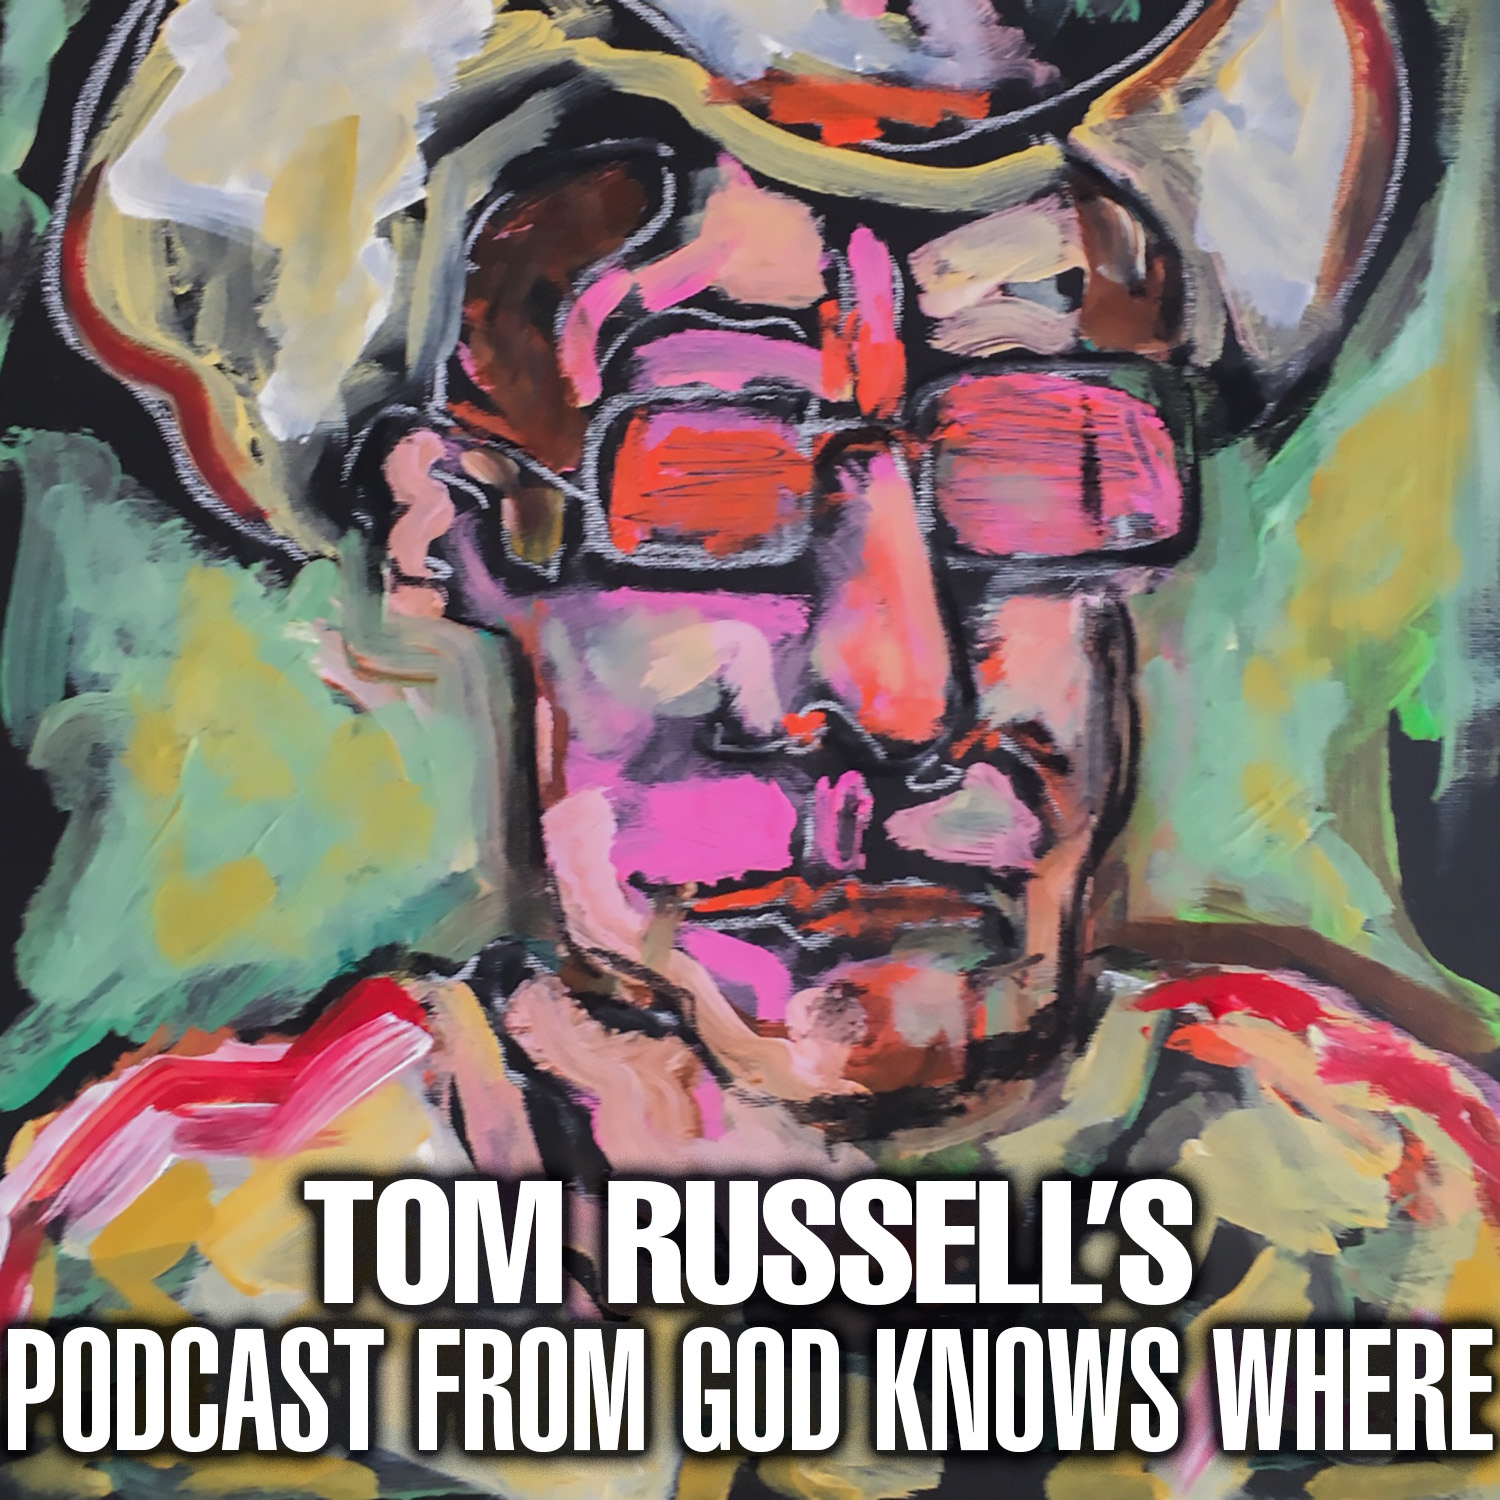 Tom Russell's Podcast from God Knows Where